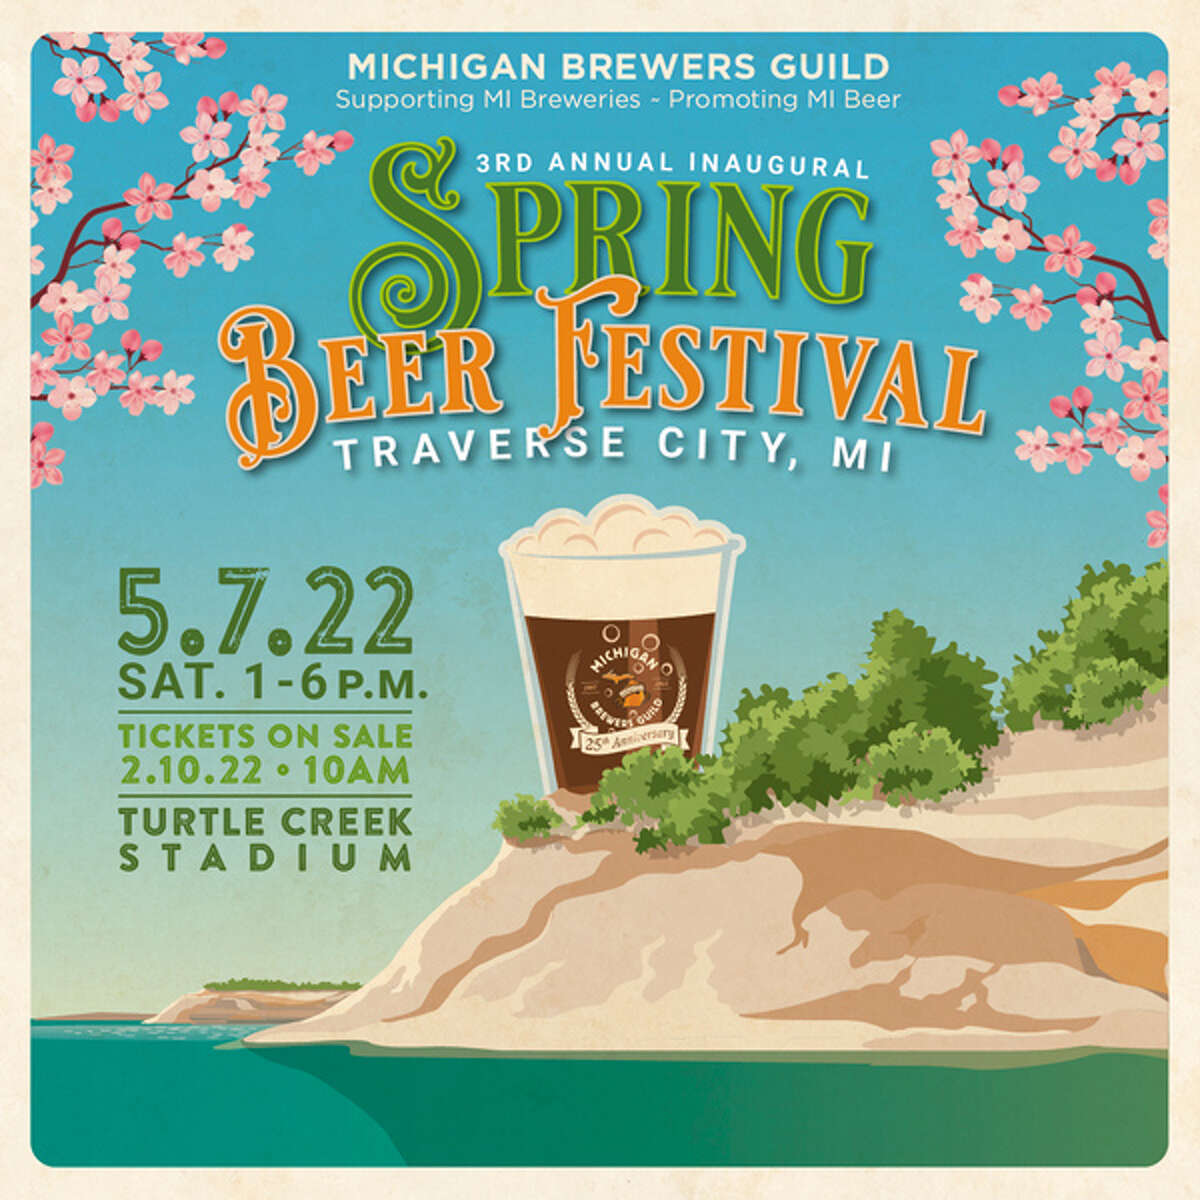 The Spring Beer Festival will be coming to Traverse City on May 7.